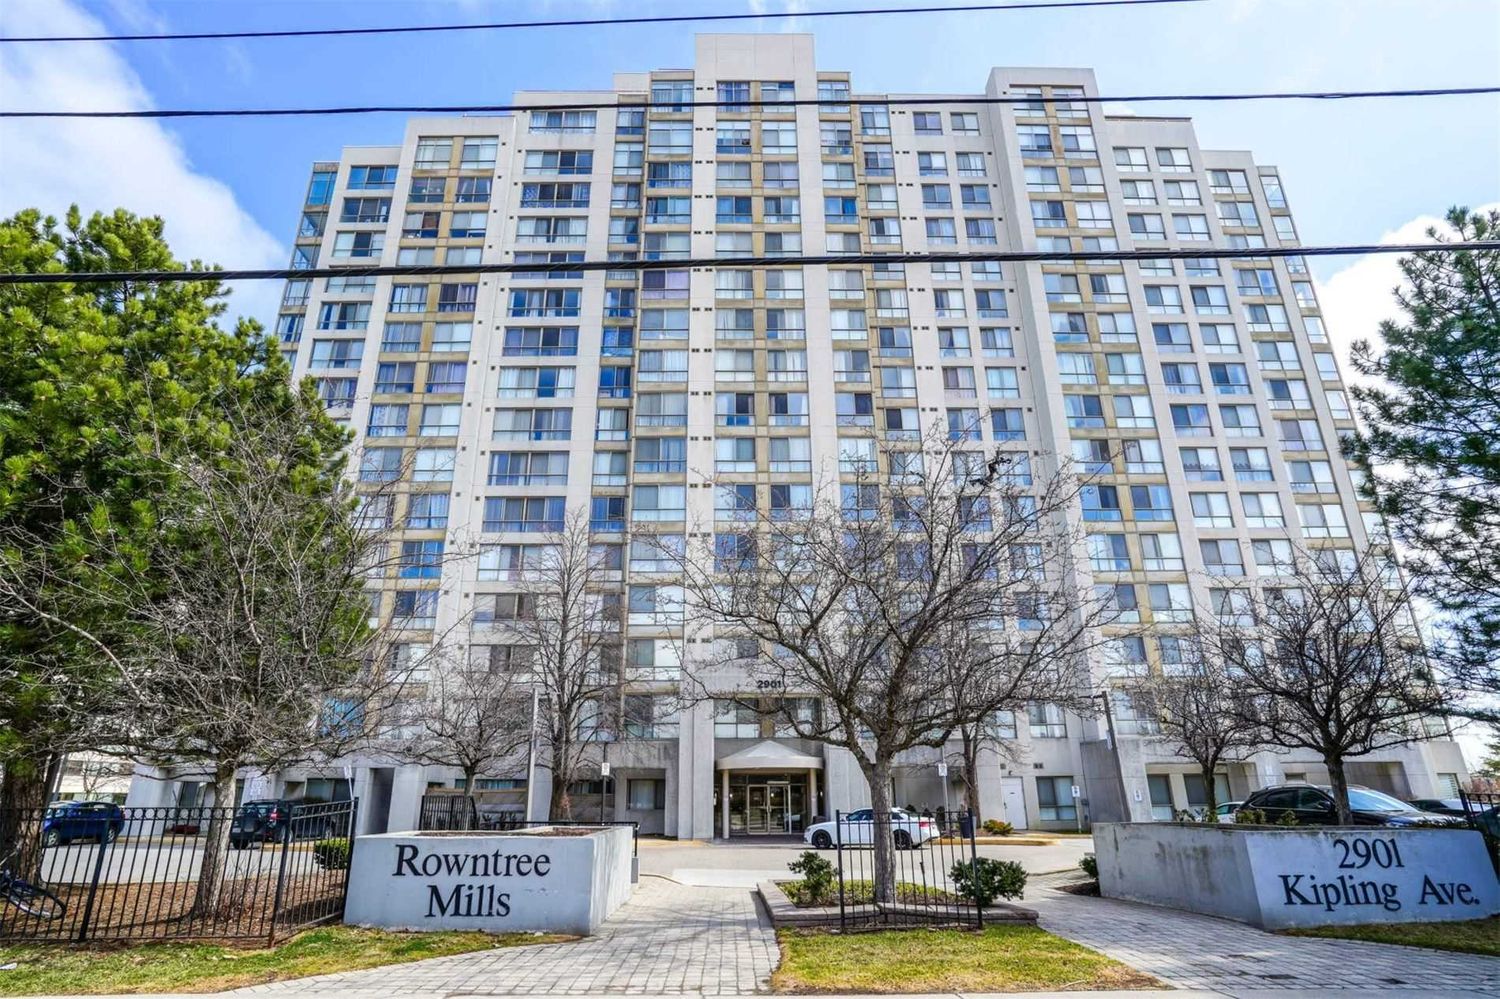 2901 Kipling Ave. This condo at Rowntree Mill Condos is located in  Etobicoke, Toronto - image #1 of 2 by Strata.ca